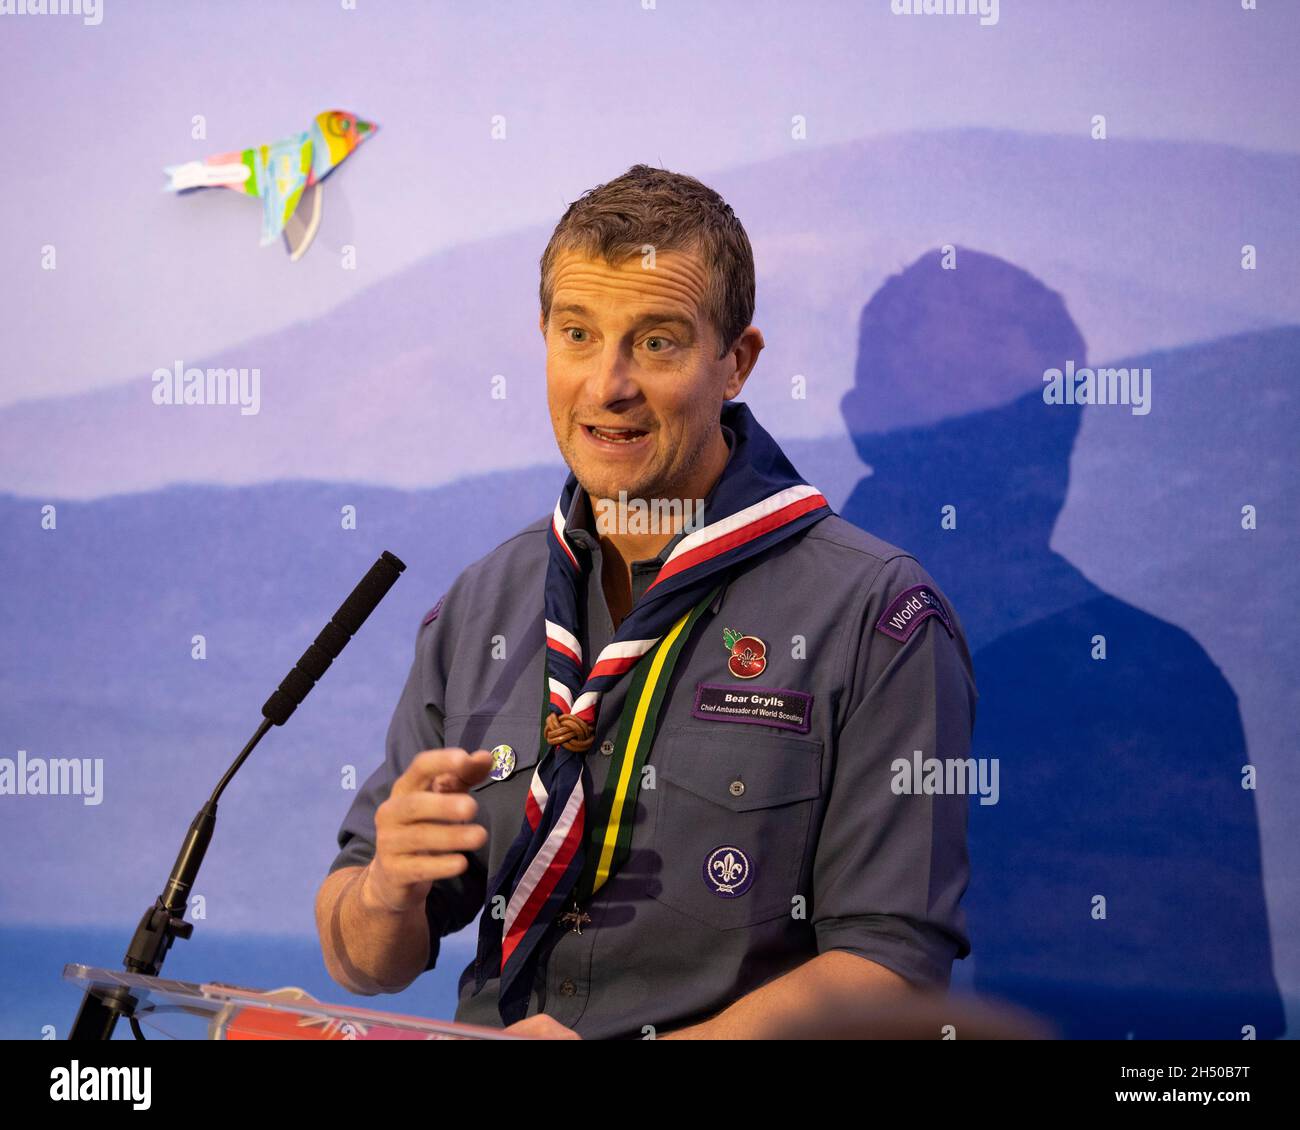 Glasgow, Scotland, UK. 5th Nov, 2021. PICTURED: Bear Grylls OBE, British adventurer and the UK's head Scout, seen at United Kingdom Pavillion at COP26 Climate Change Conference giving a speech. Edward Michael 'Bear' Grylls OBE is a British adventurer, writer, television presenter and businessman. Grylls first drew attention after embarking on a number of adventures, and then became widely known for his television series Man vs. Wild. Credit: Colin Fisher/Alamy Live News Stock Photo